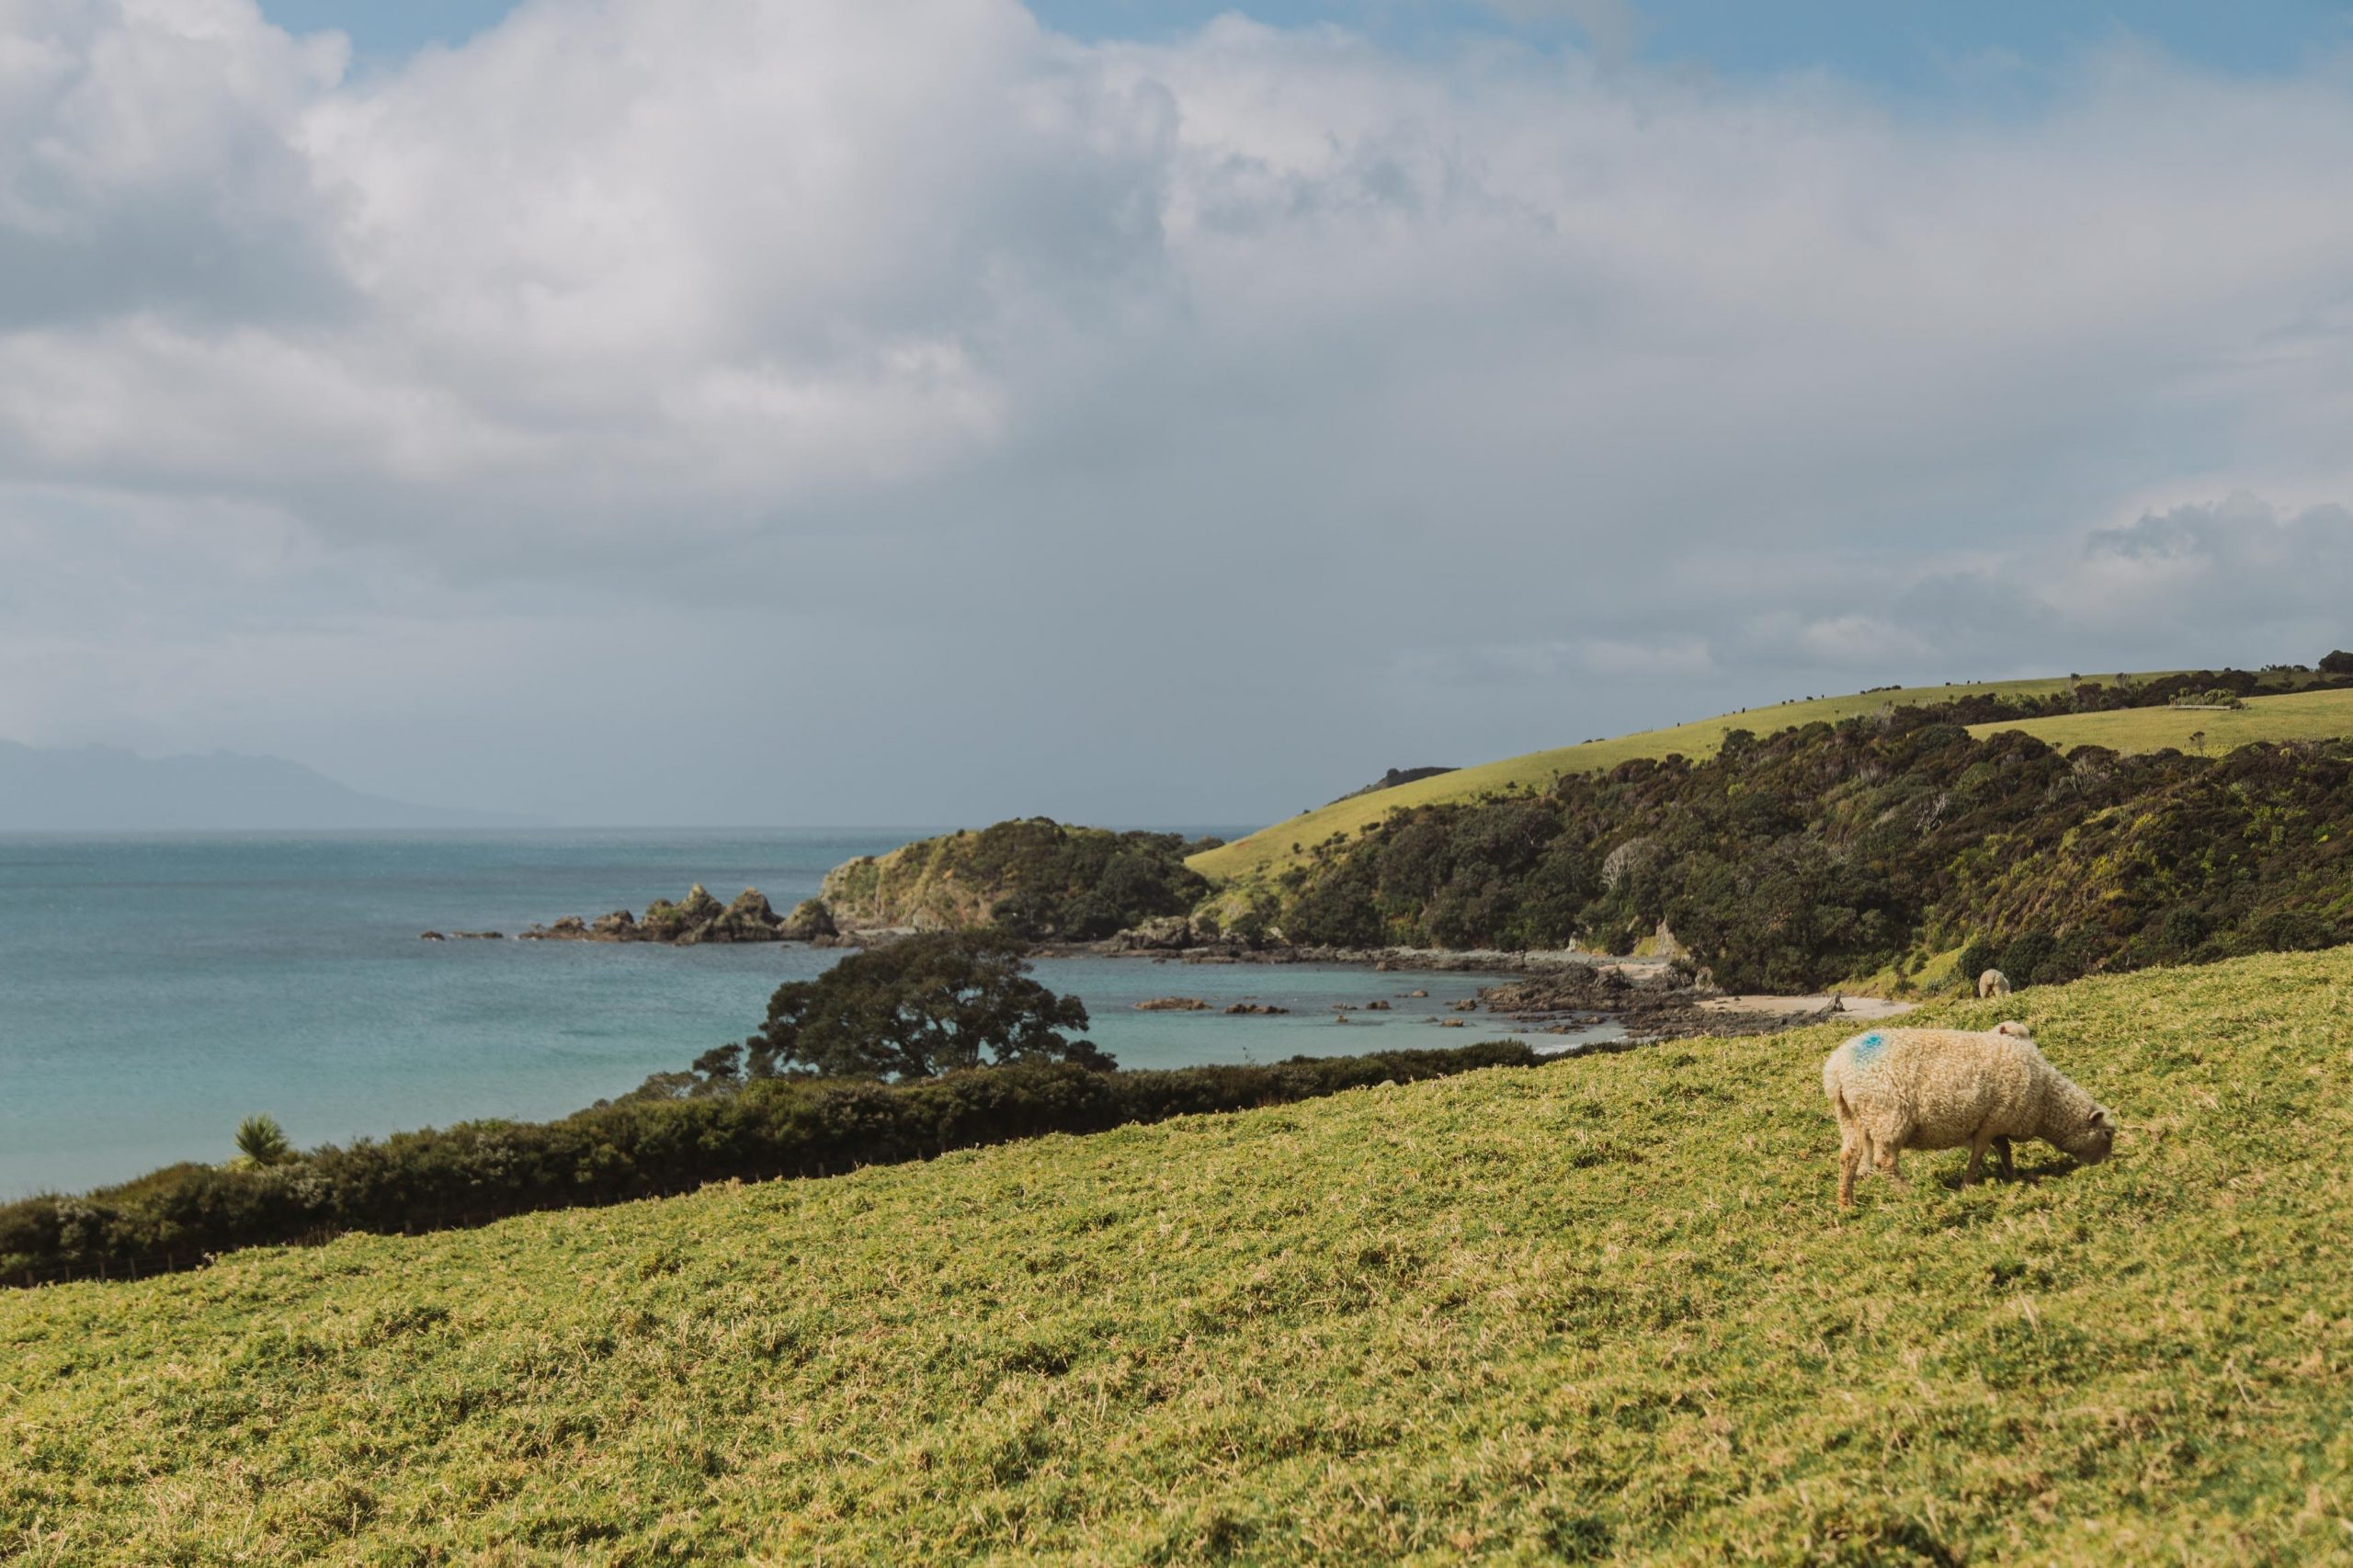 A sheep eating grass on a grassy headland next to the ocean.